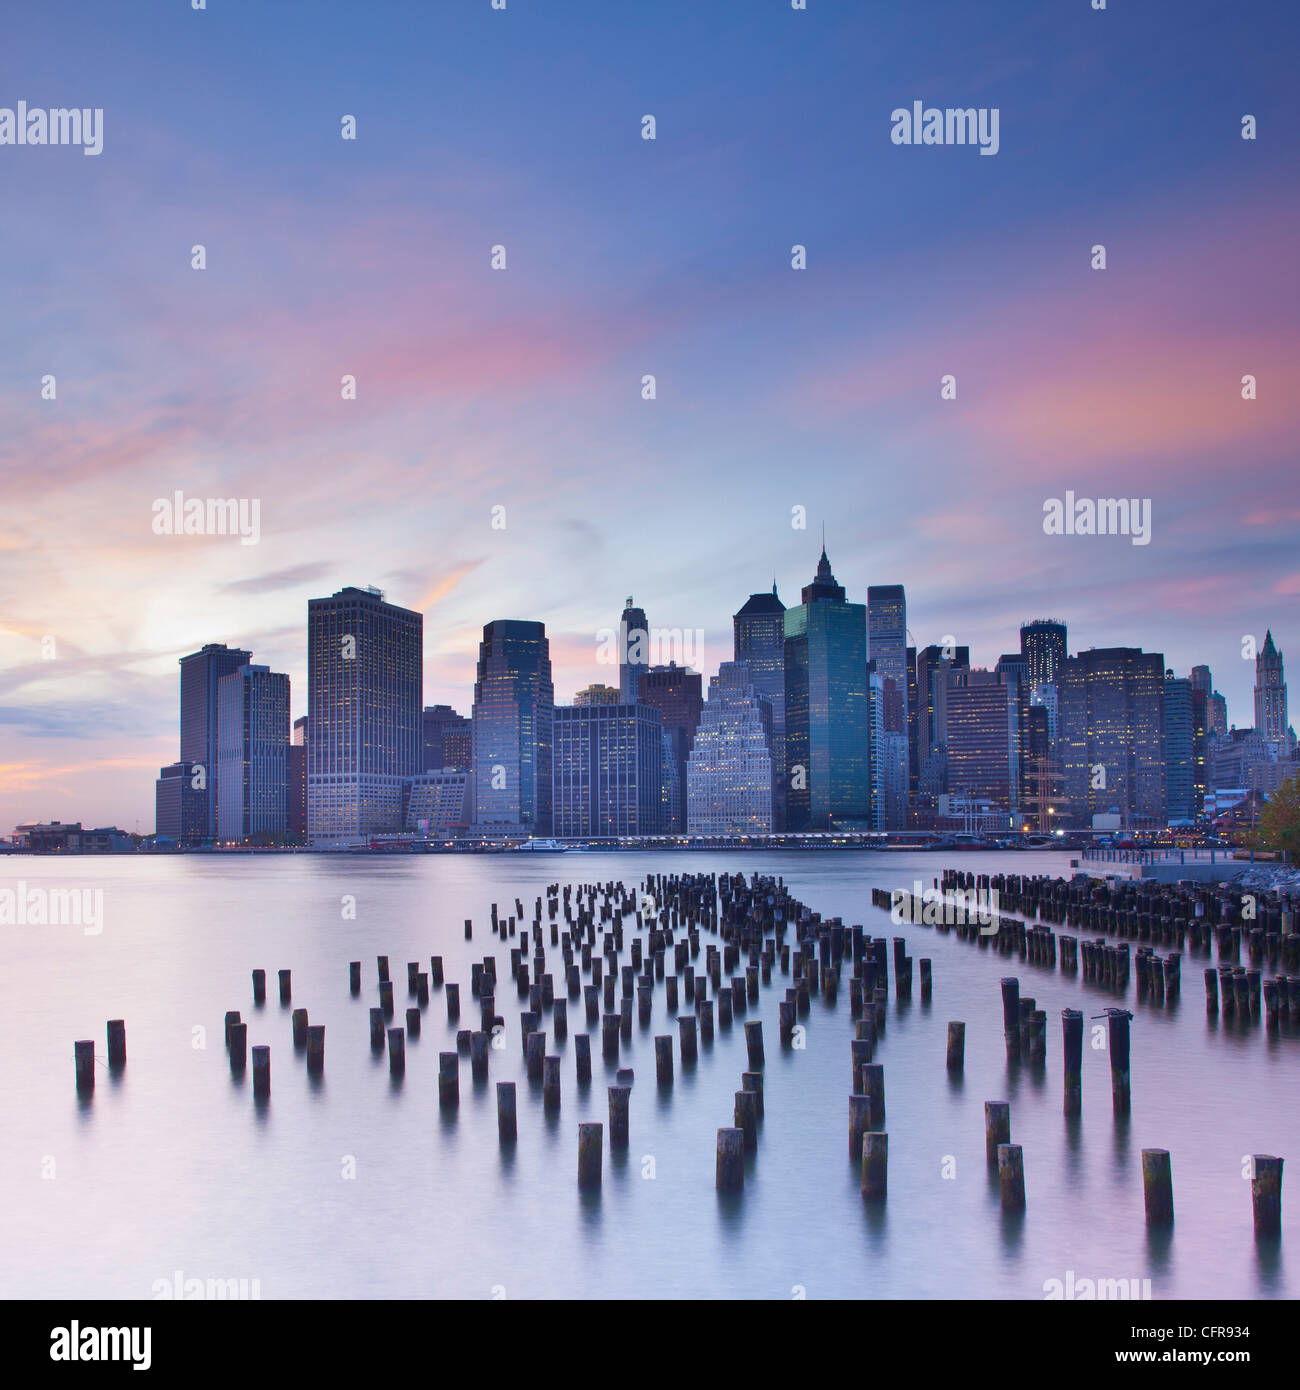 Dusk view of the skyscrapers of Manhattan, New York, United States of America, North America Stock Photo